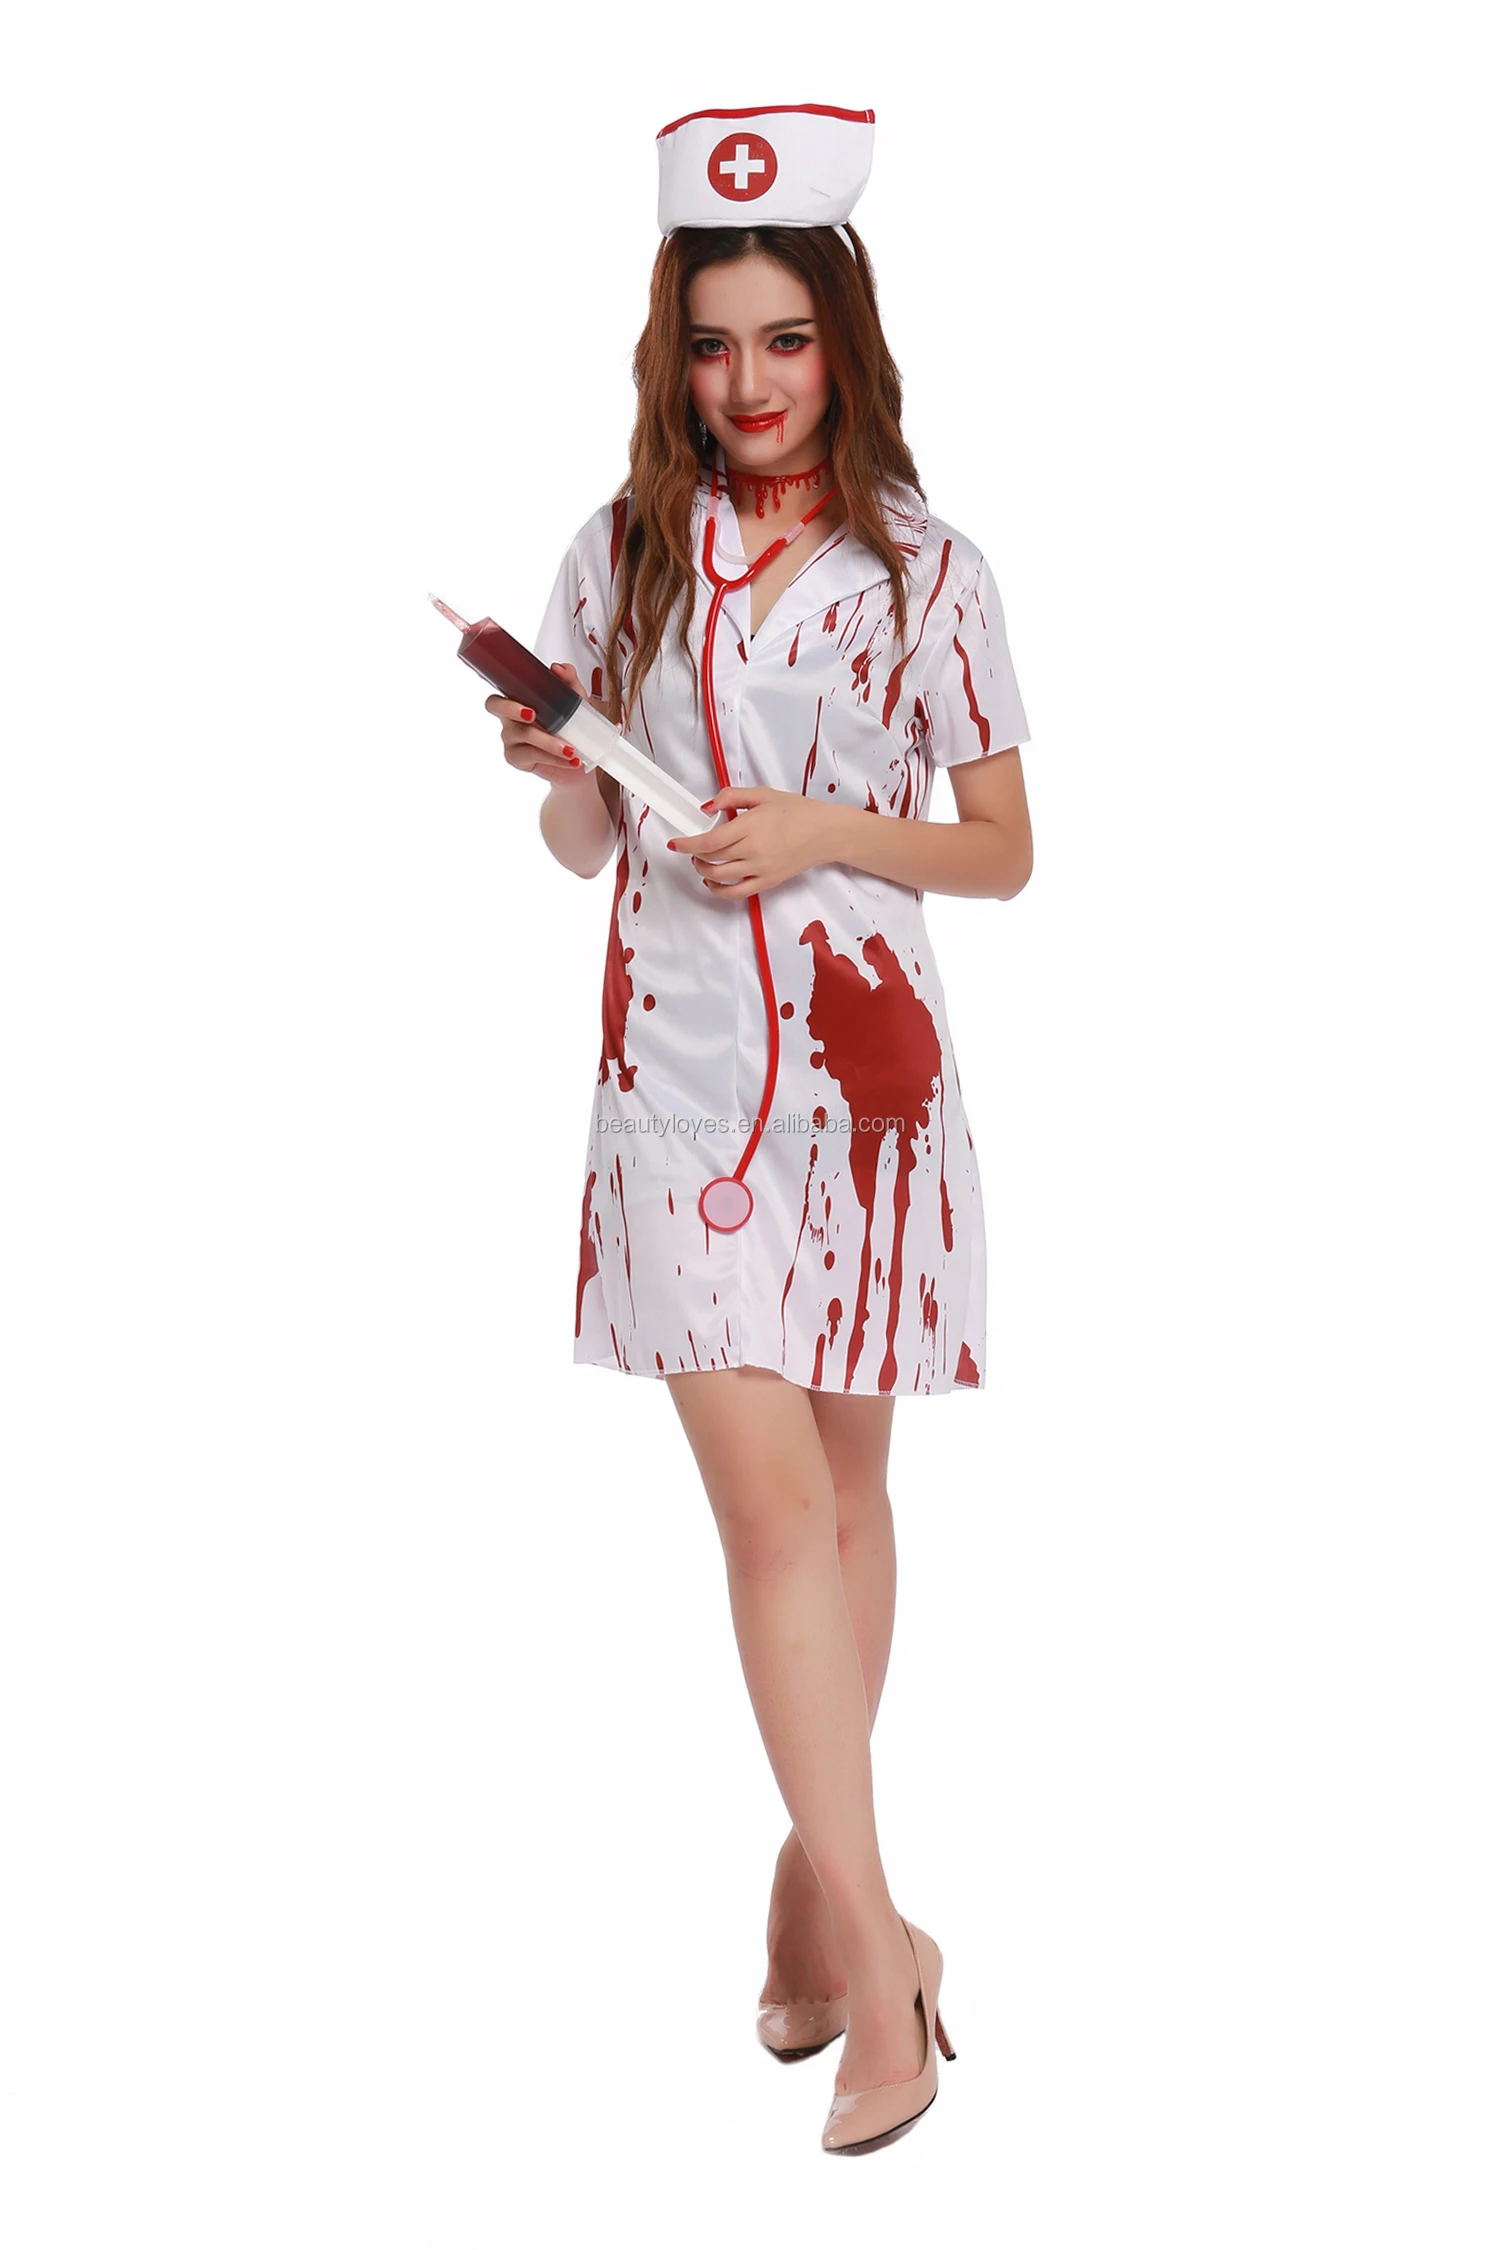 LADIES ZOMBIE NURSE HALLOWEEN FANCY DRESS COSTUME PLUS HAT BLOOD STAINED OUTFIT 